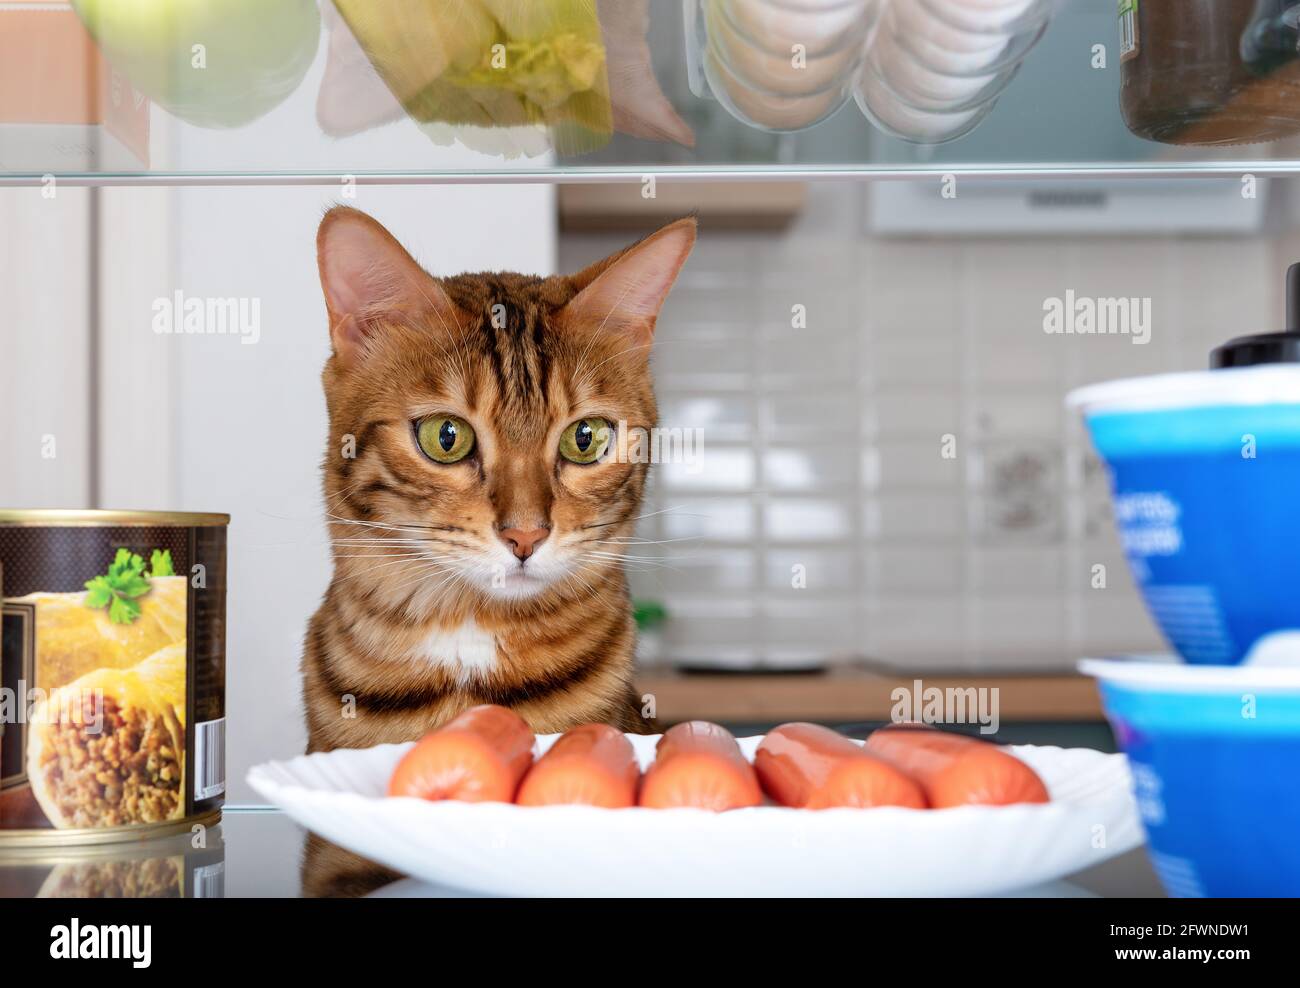 Funny bengal cat looks with appetite at a plate of sausages in the fridge Stock Photo